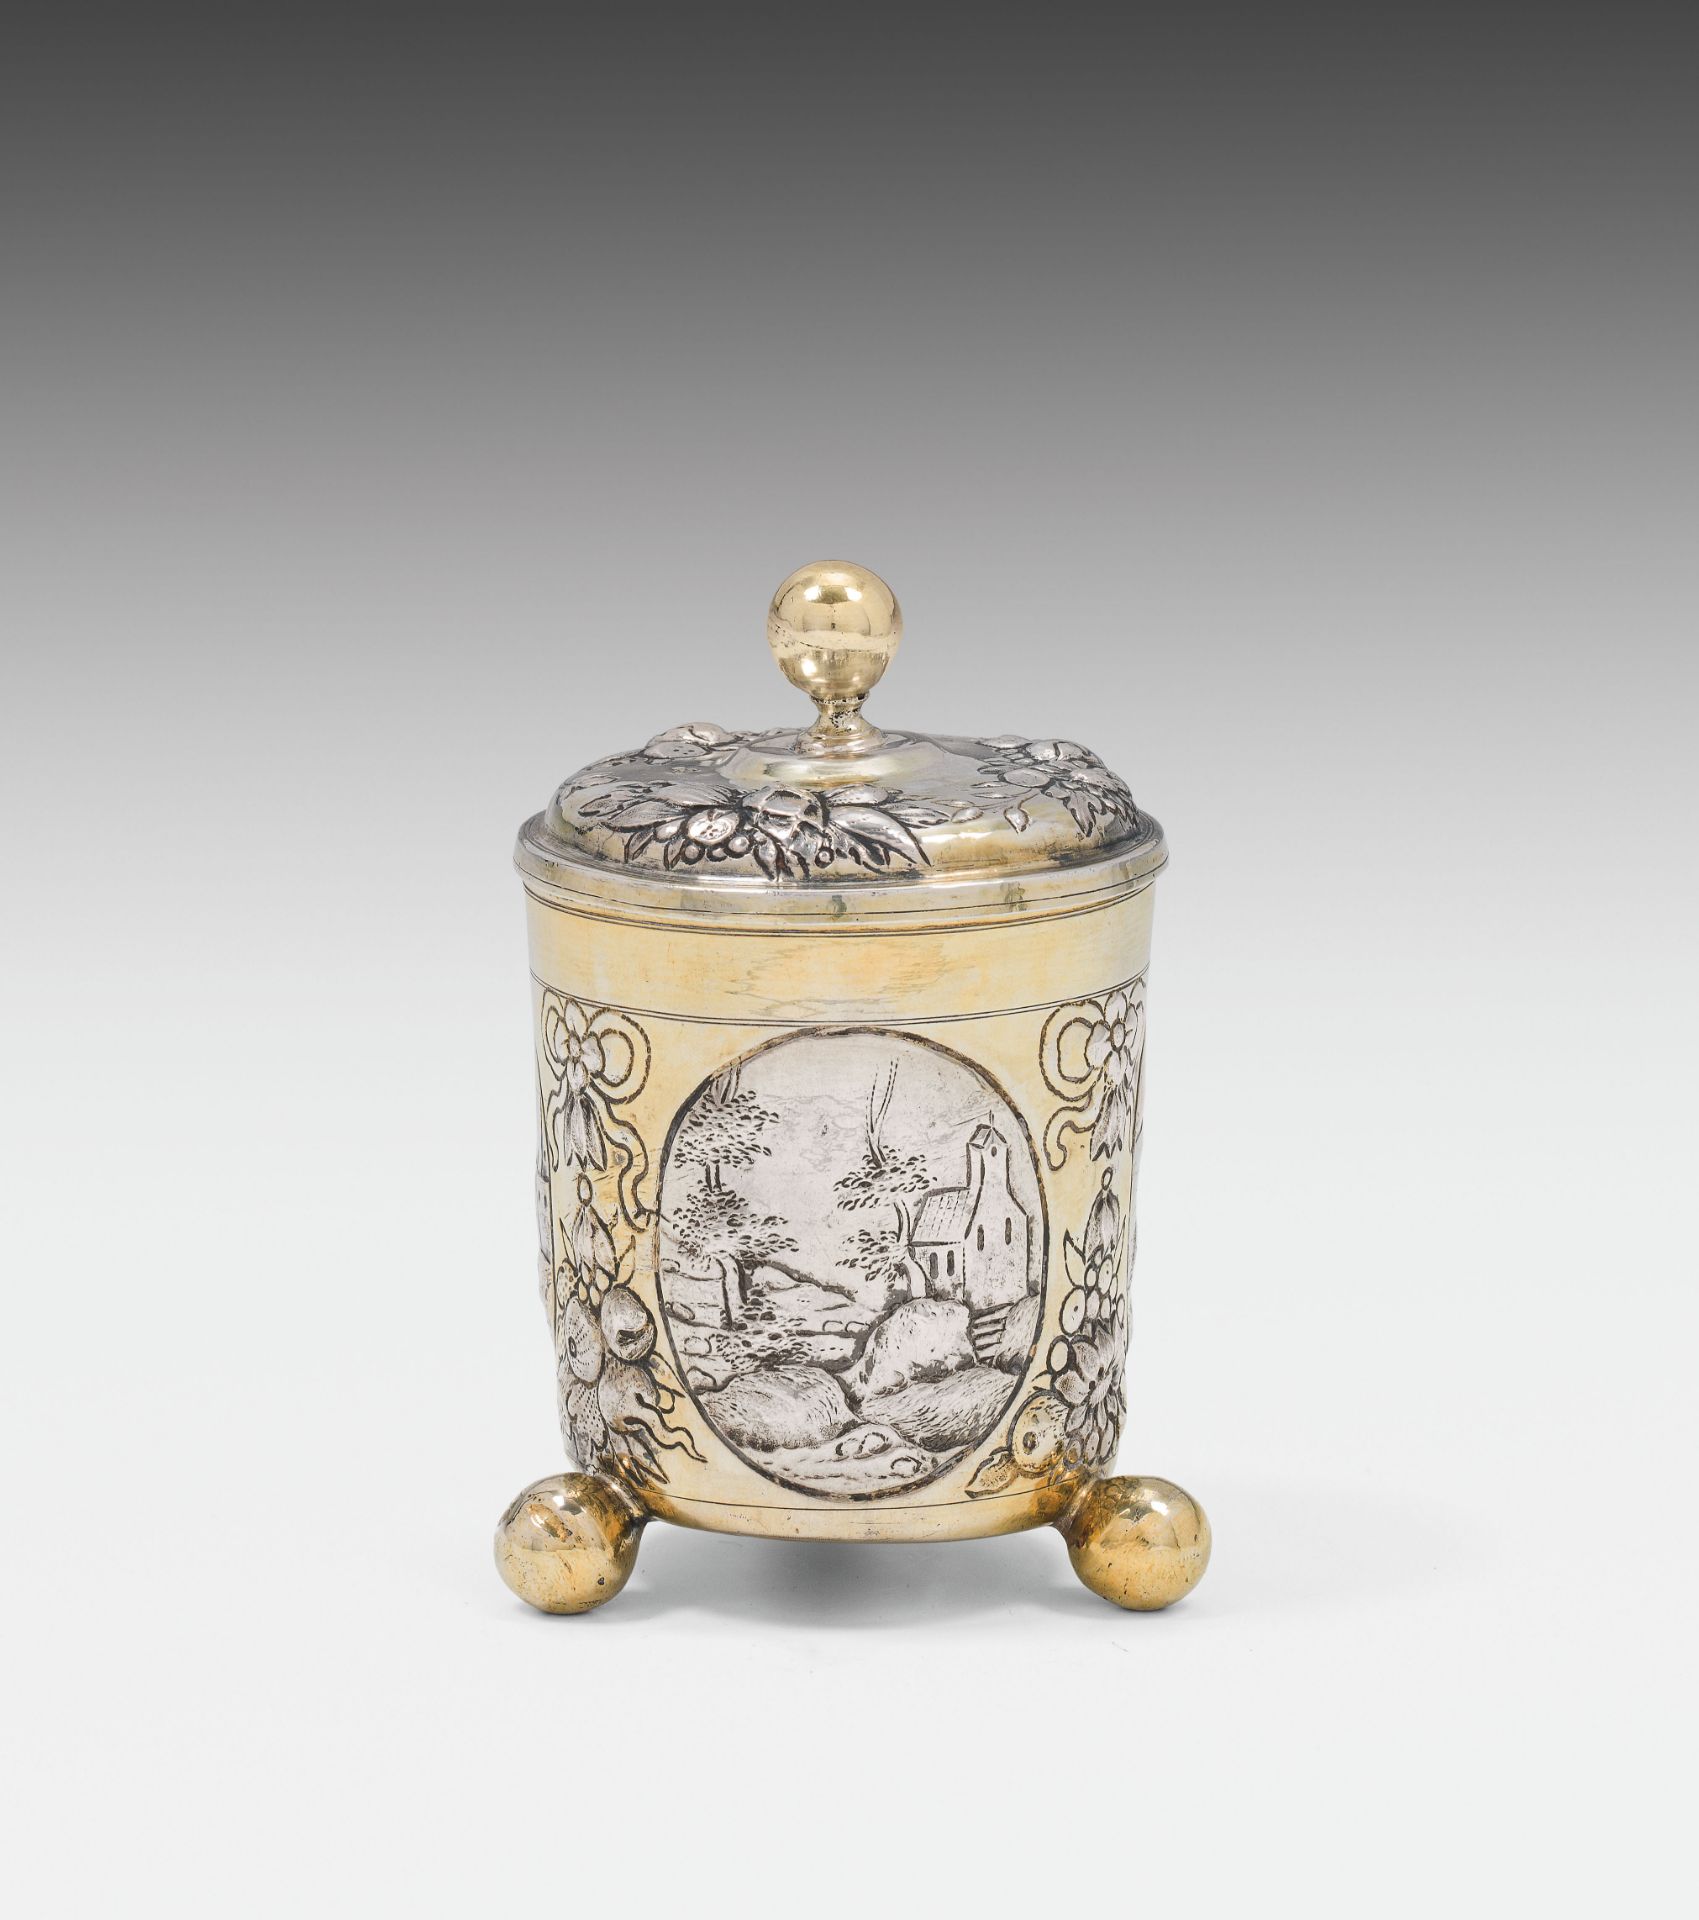 Beakersilver, partly gilded; marked on the bottom and on the lid: Augsburg hallmark, "92" and